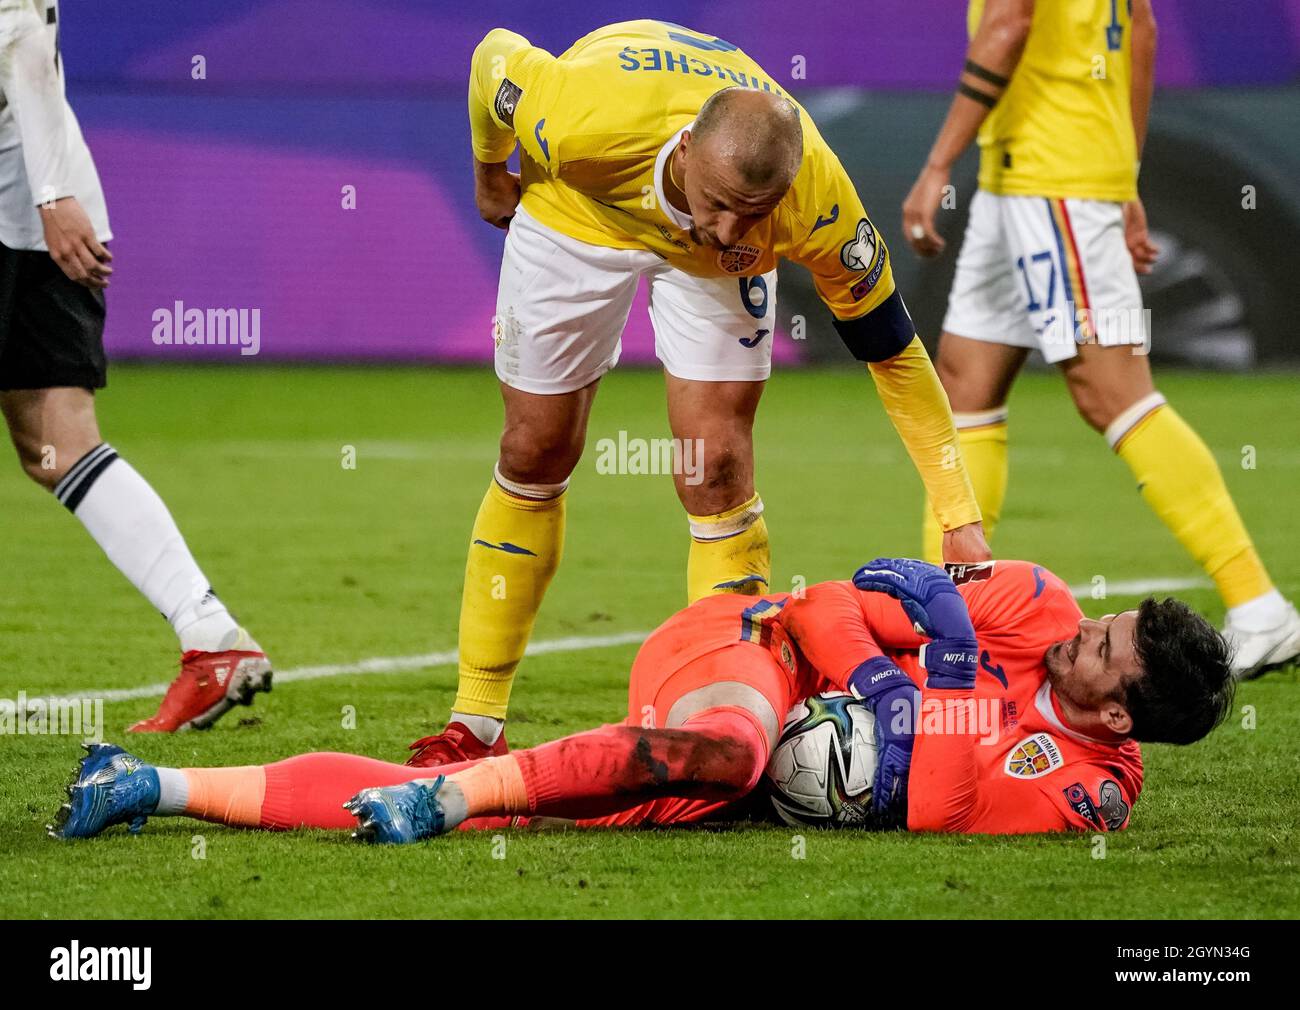 Hamburg, Germany. 08th Oct, 2021. Football: World Cup Qualification Europe, Germany - Romania, Group Stage, Group J, Matchday 7 at Volksparkstadion. Romania's Vlad Chiriches (o) and Romania's goalkeeper Florin Nita. Credit: Axel Heimken/dpa/Alamy Live News Stock Photo